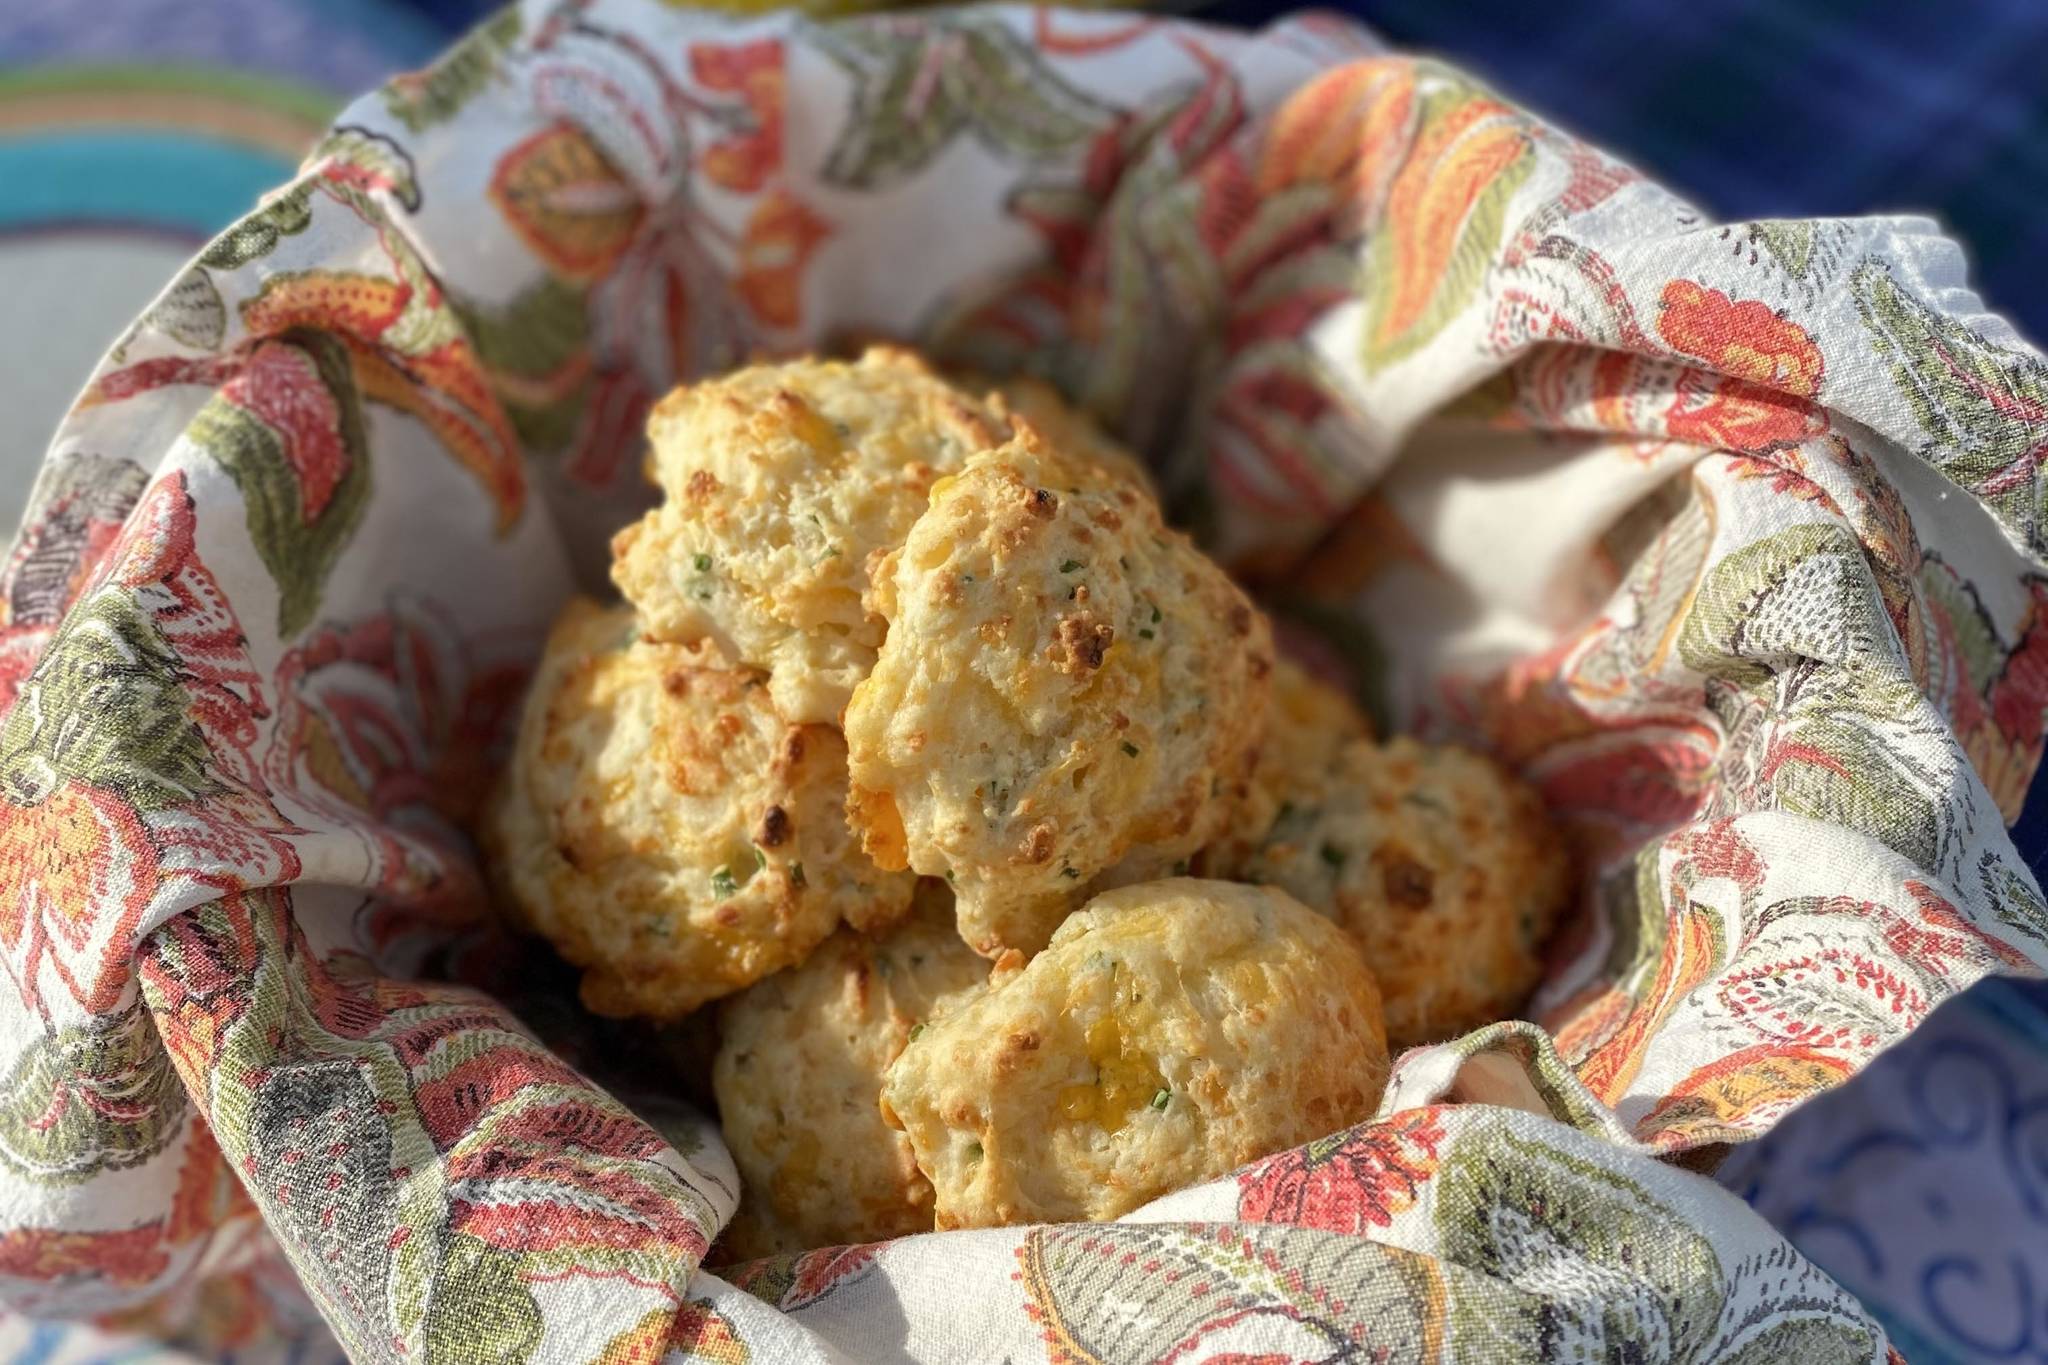 Cheddar biscuits go hand in hand with summer seafood catch. Photographed on Saturday, June 12, 2021, in Nikiski, Alaska. (Photo by Tressa Dale)